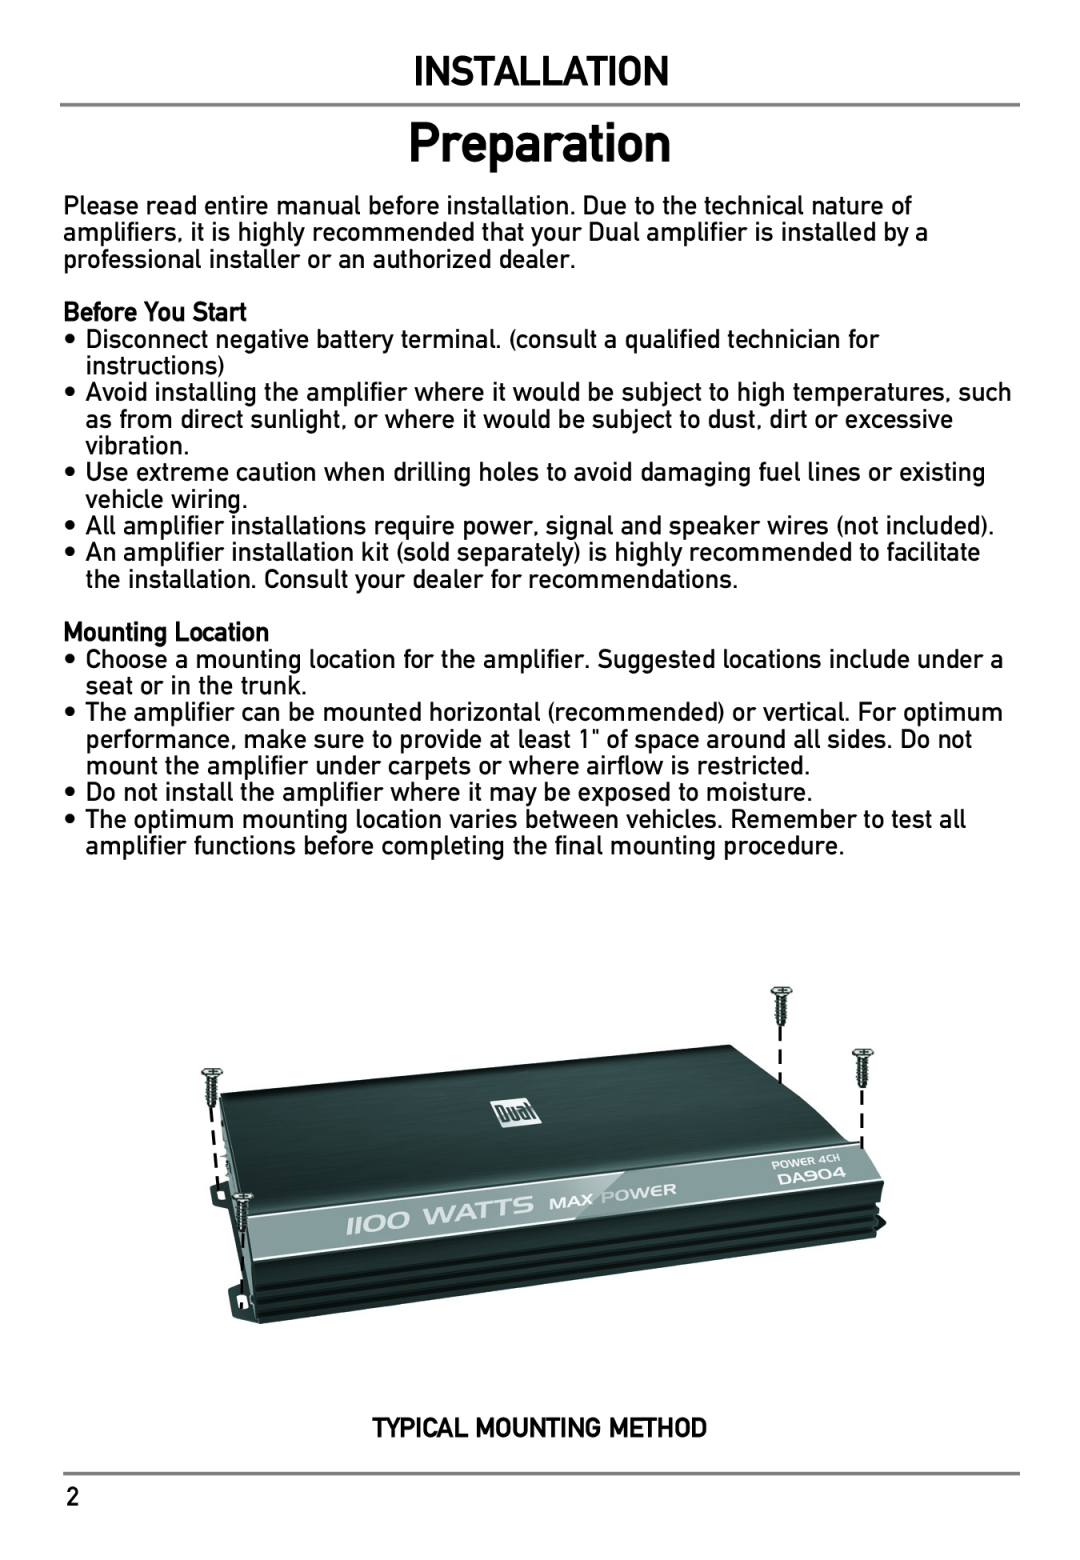 Dual DA304 owner manual Preparation, Installation, Before You Start, Mounting Location, Typical Mounting Method 